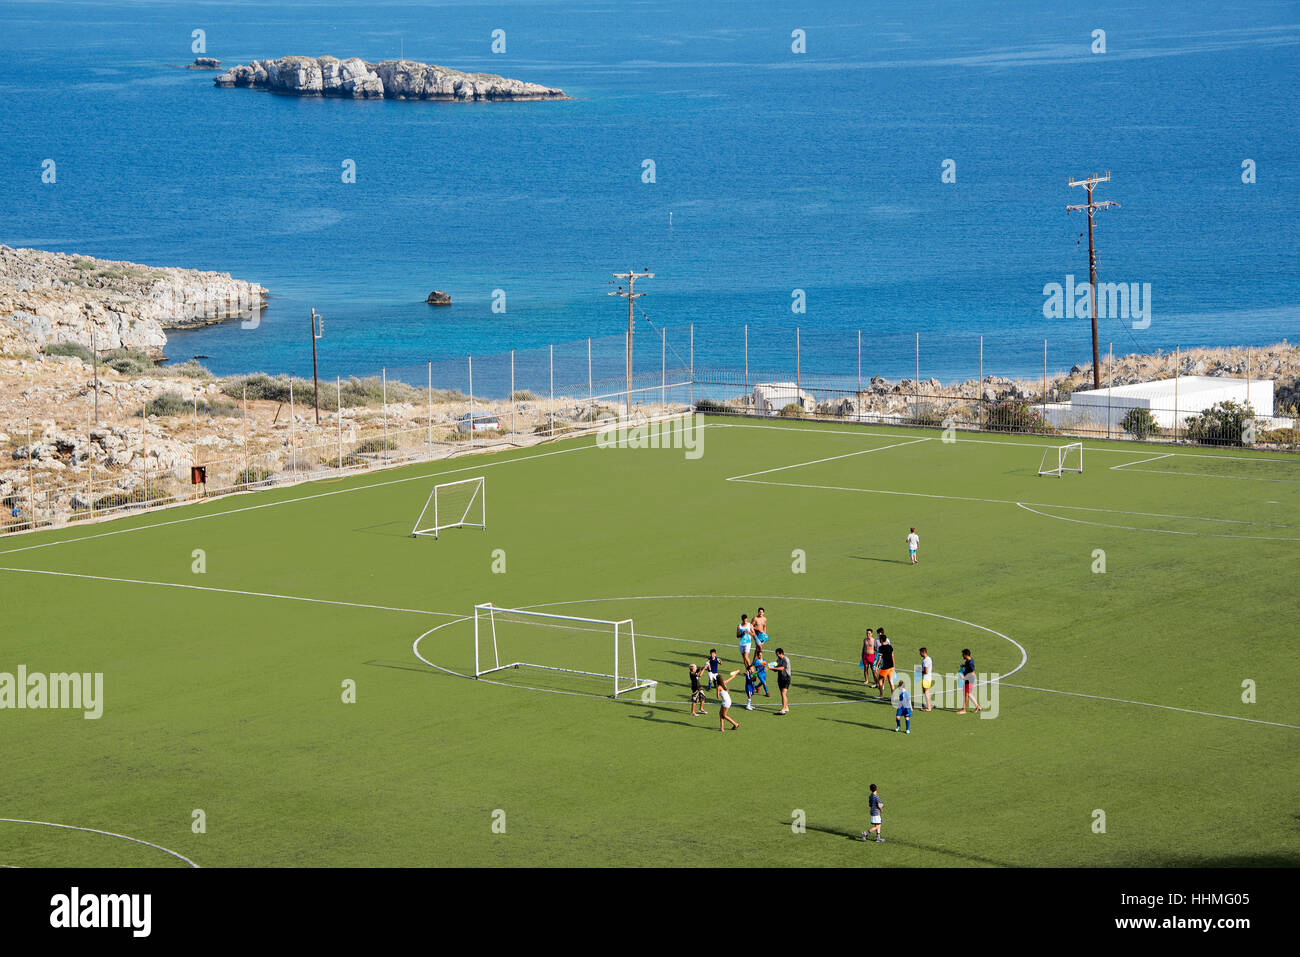 School football pitches overlooking Lindos Bay in Rhodes, Greek Islands Stock Photo